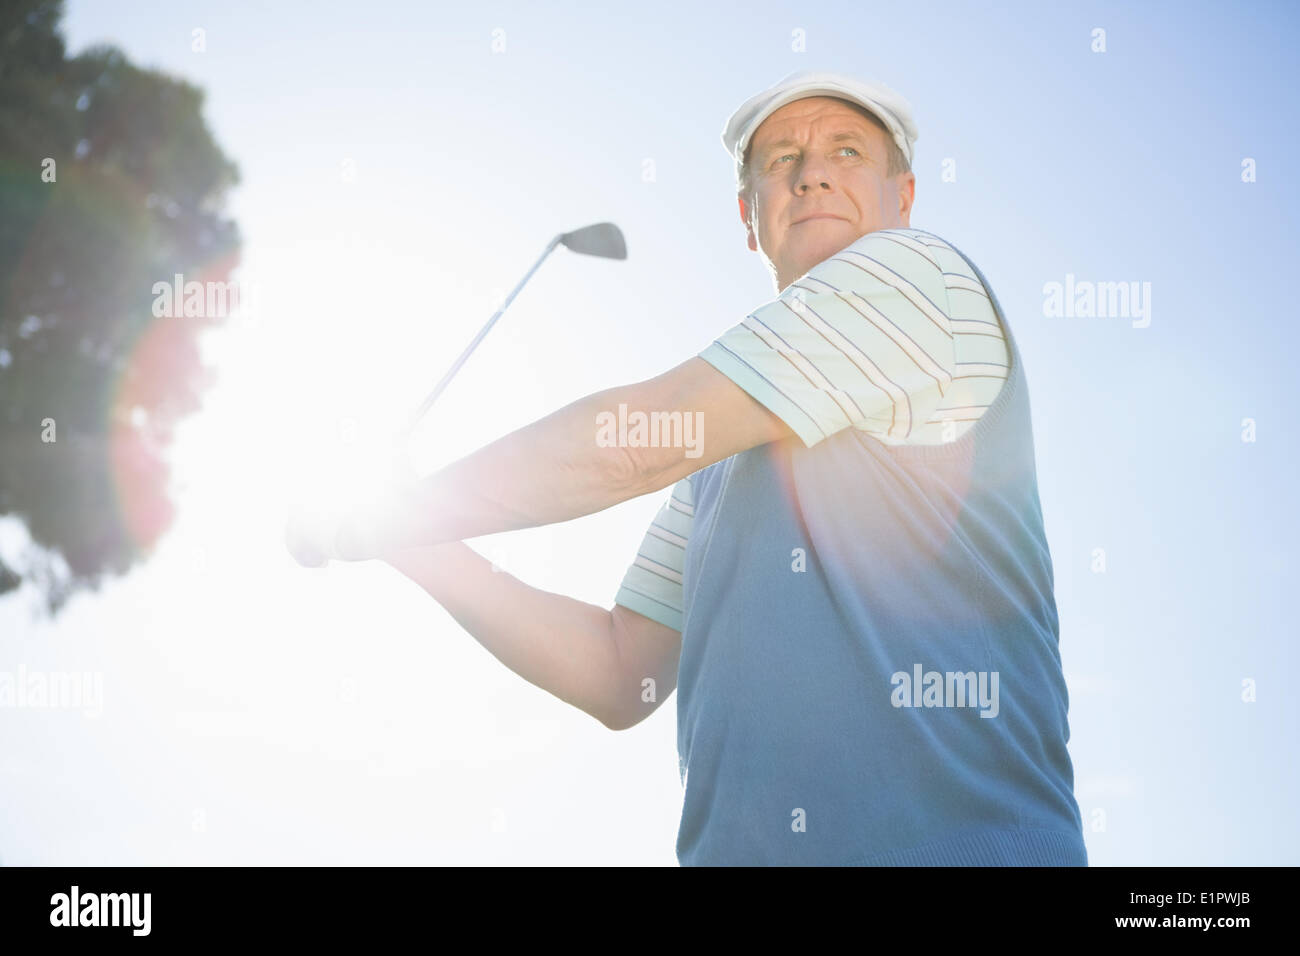 Golfer taking a shot and smiling Stock Photo